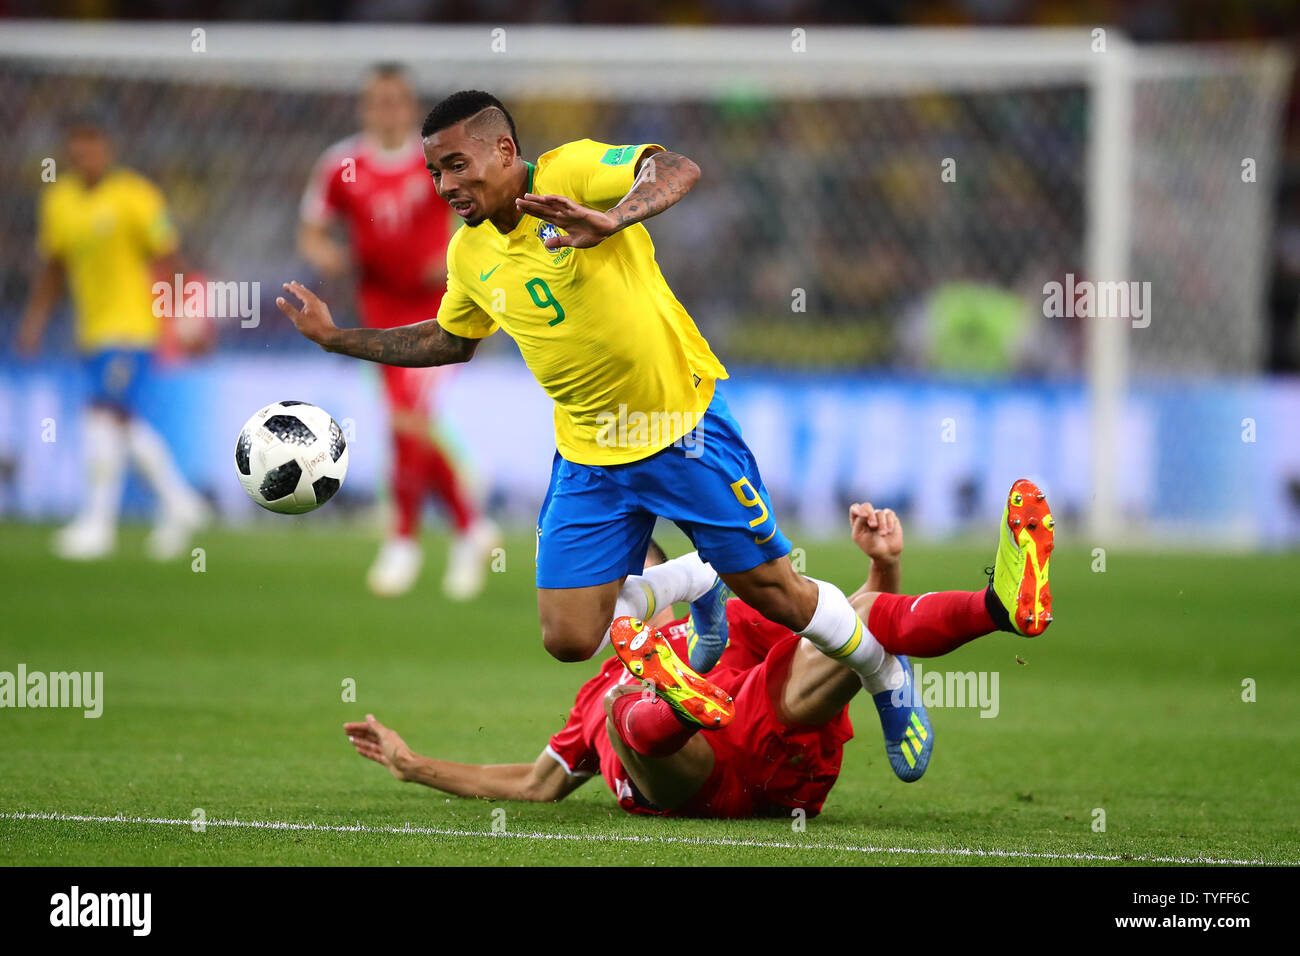 Gabriel Jesus (L) of Brazil is challenged by Nemanja Matic of Serbia during the 2018 FIFA World Cup Group E match at Spartak Stadium in Moscow, Russia on June 27, 2018. Brazil beat Serbia 2-0 to qualify for the round of 16. Photo by Chris Brunskill/UPI Stock Photo